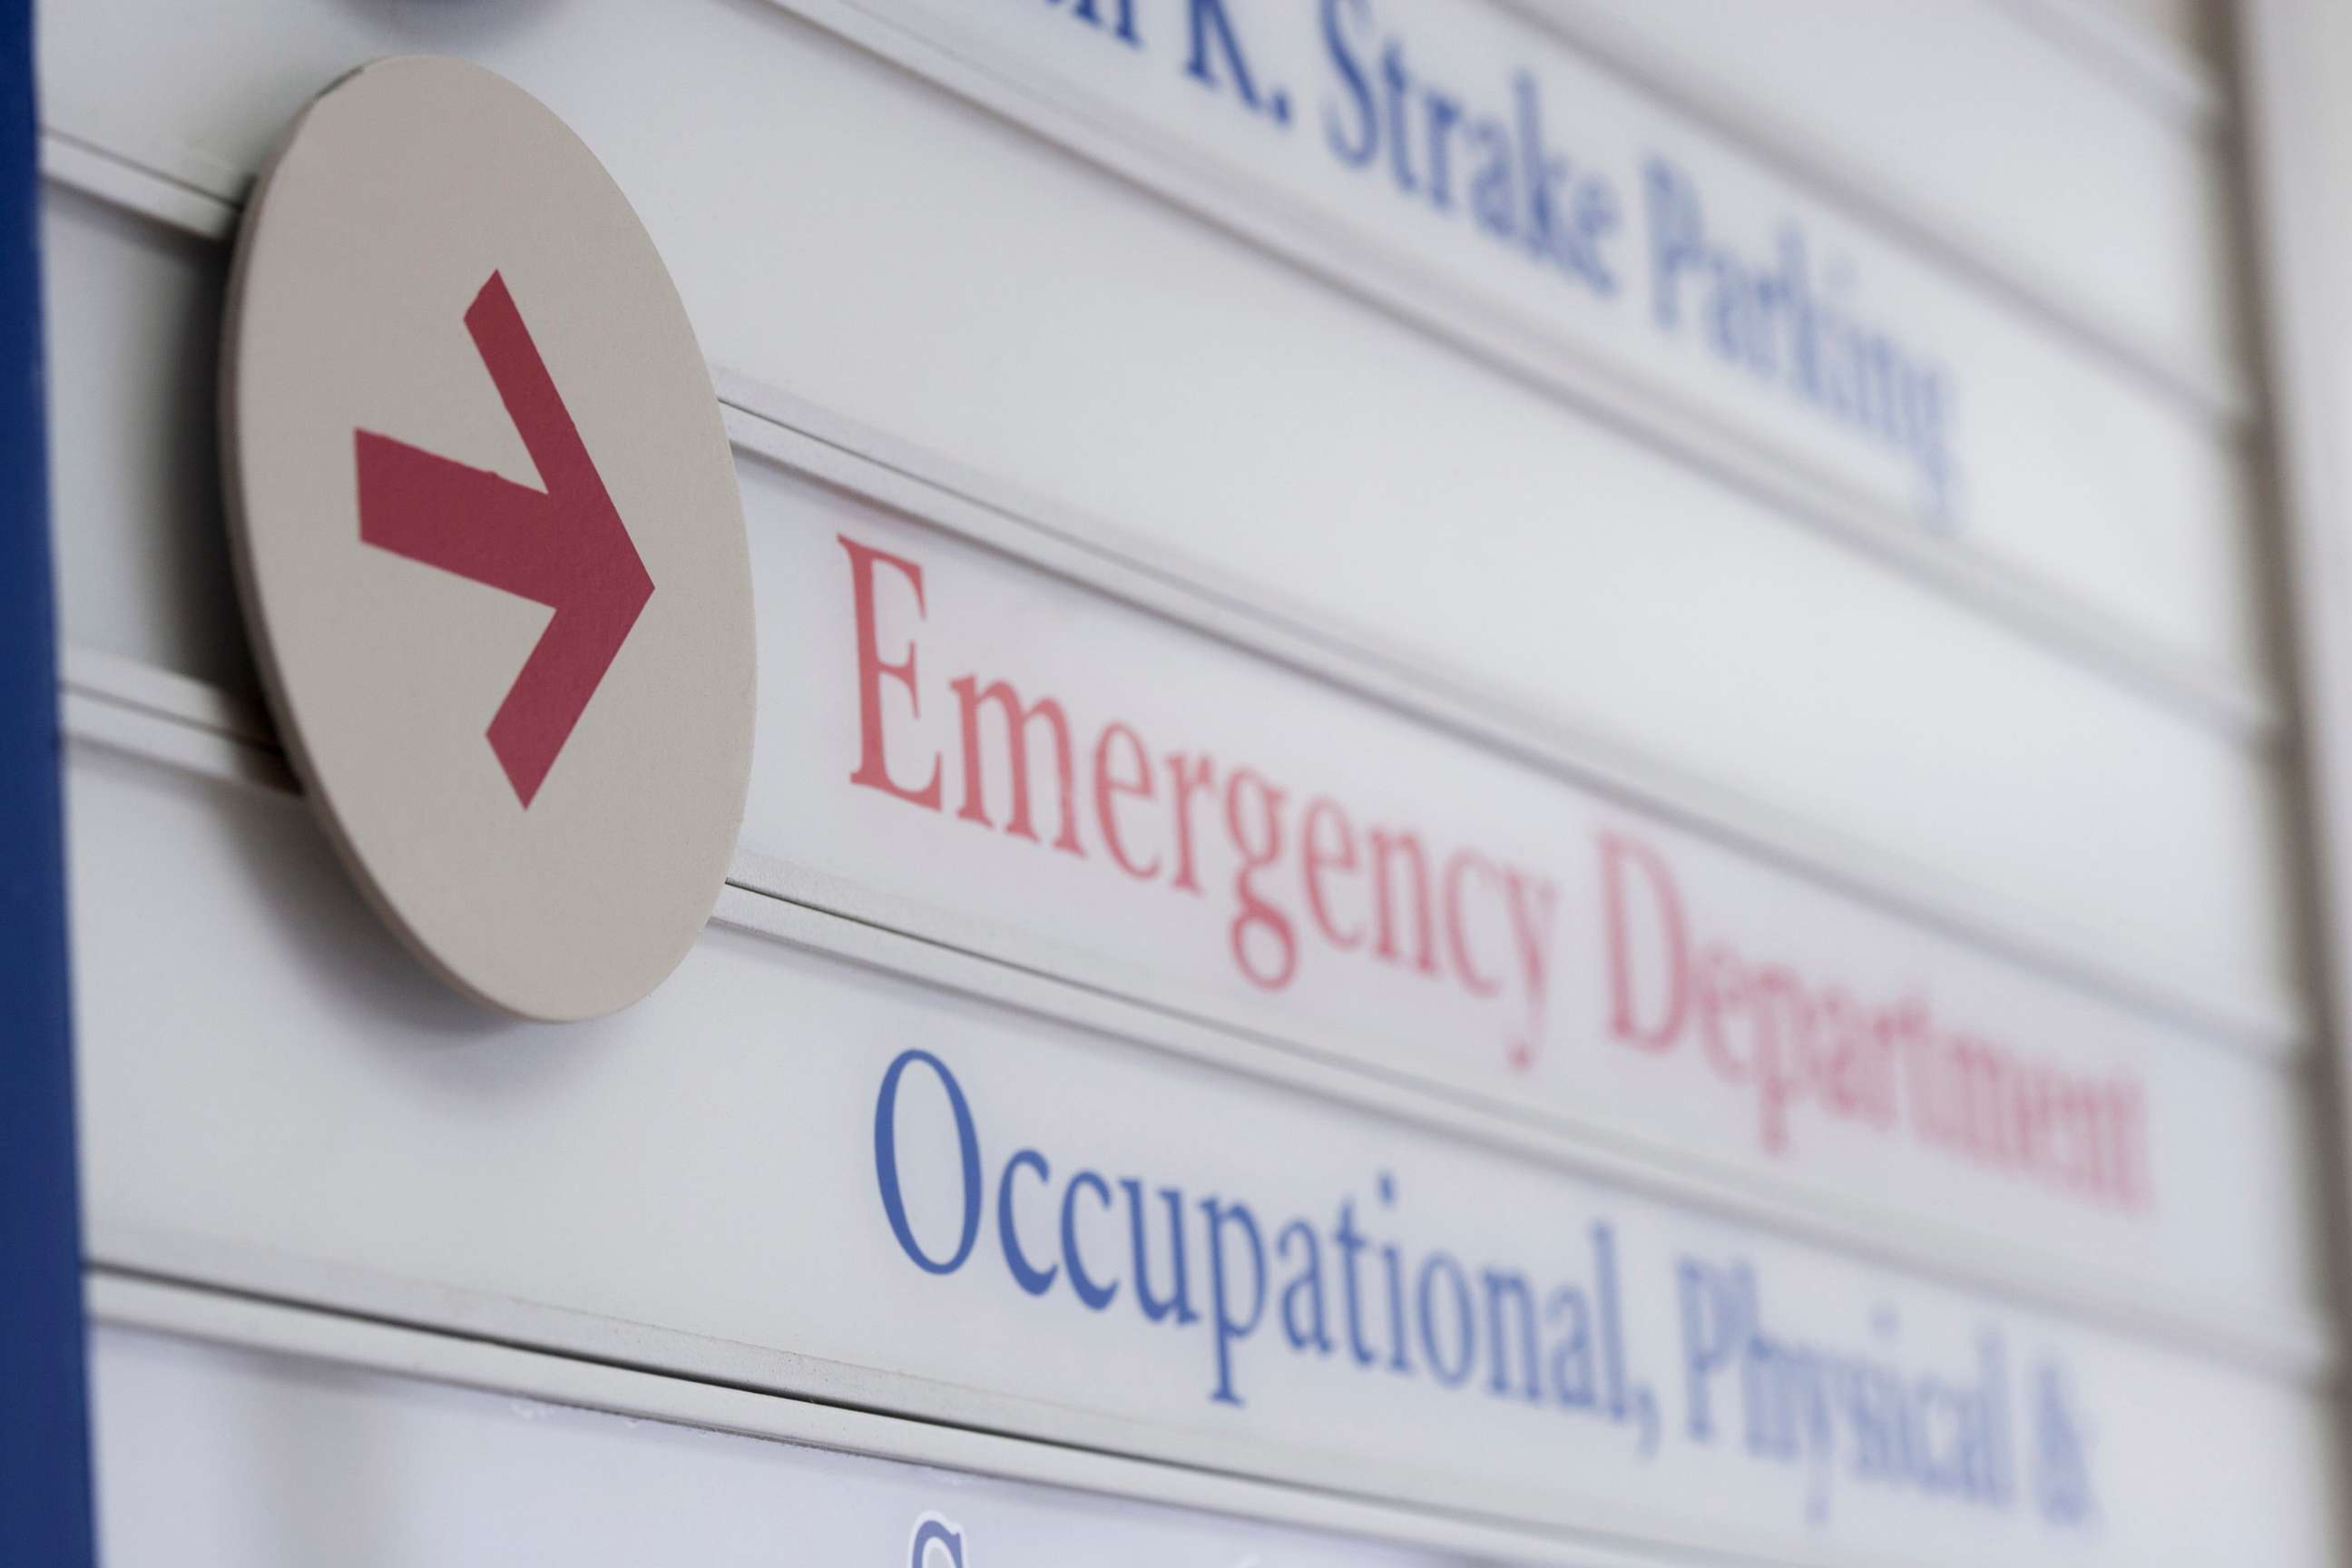 PHOTO: Close up of sign for emergency department in hospital.